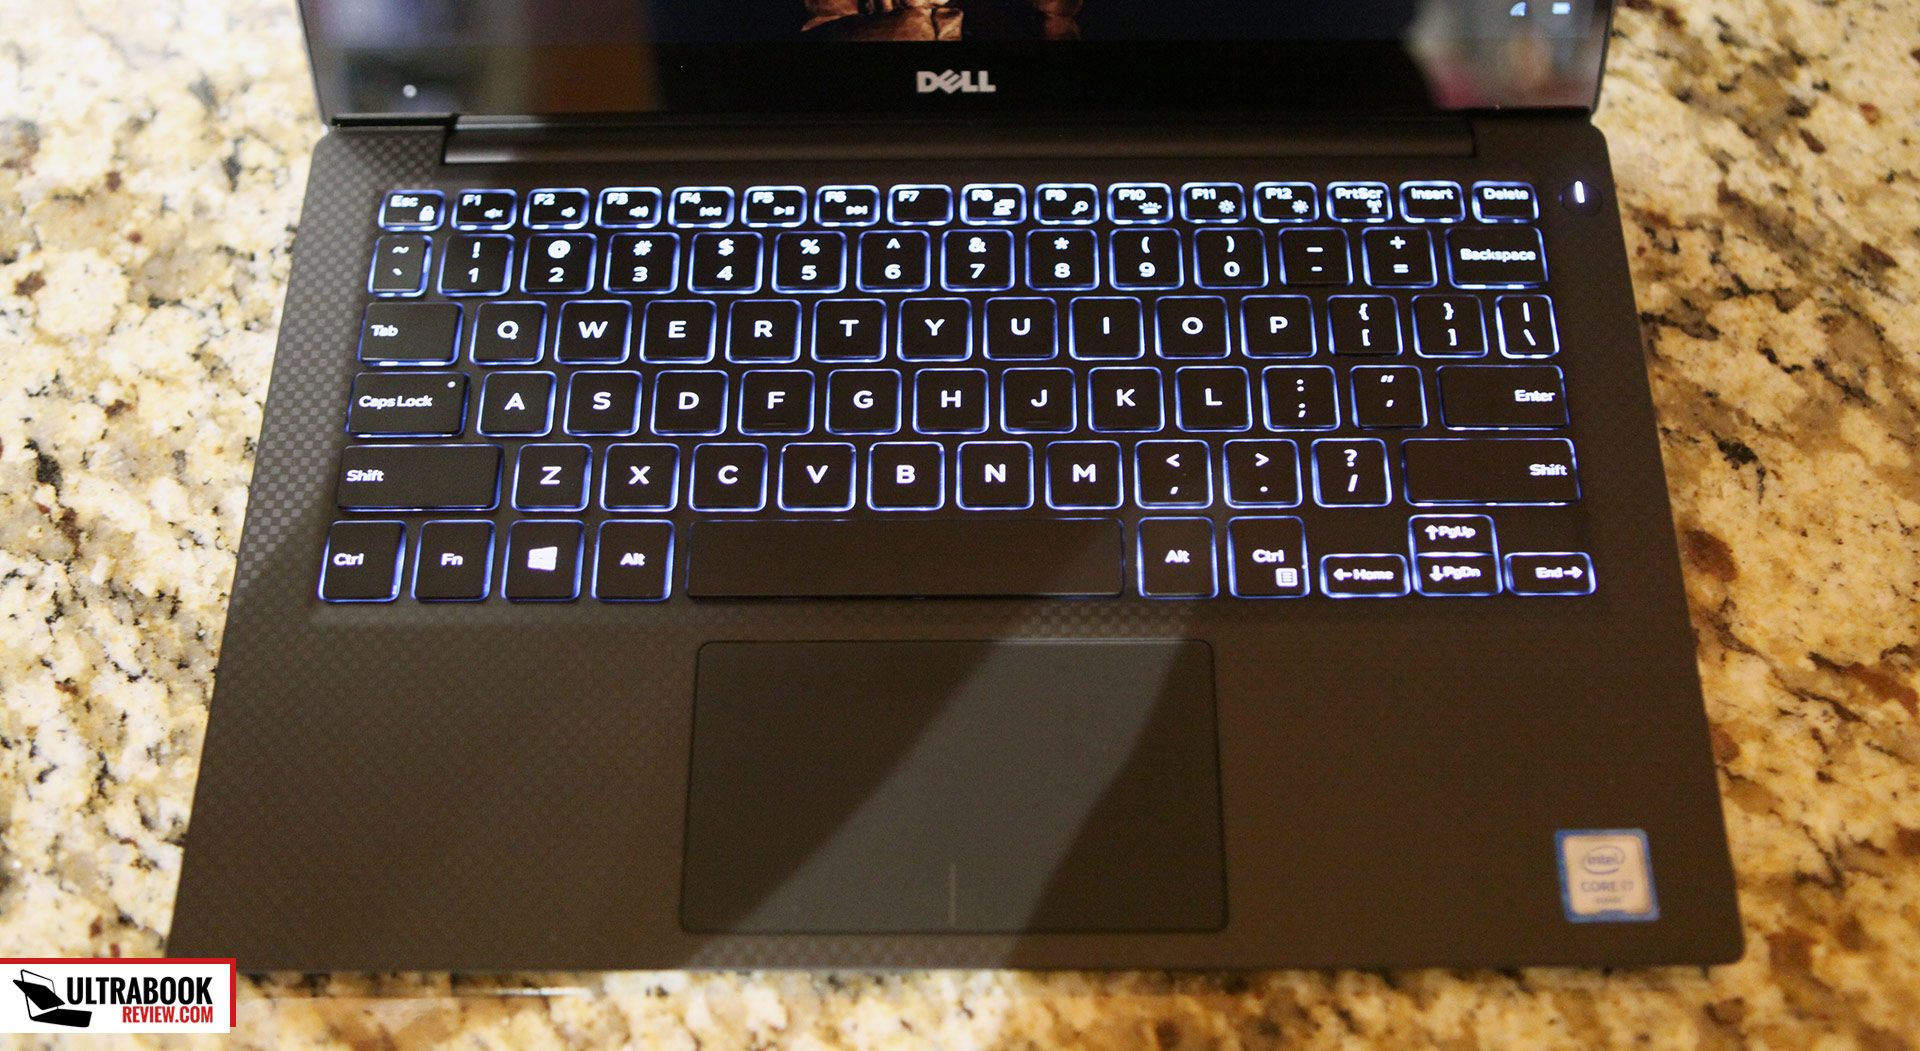 Dell XPS 13 9350 review - Core i7 model, with Intel Iris 540 graphics